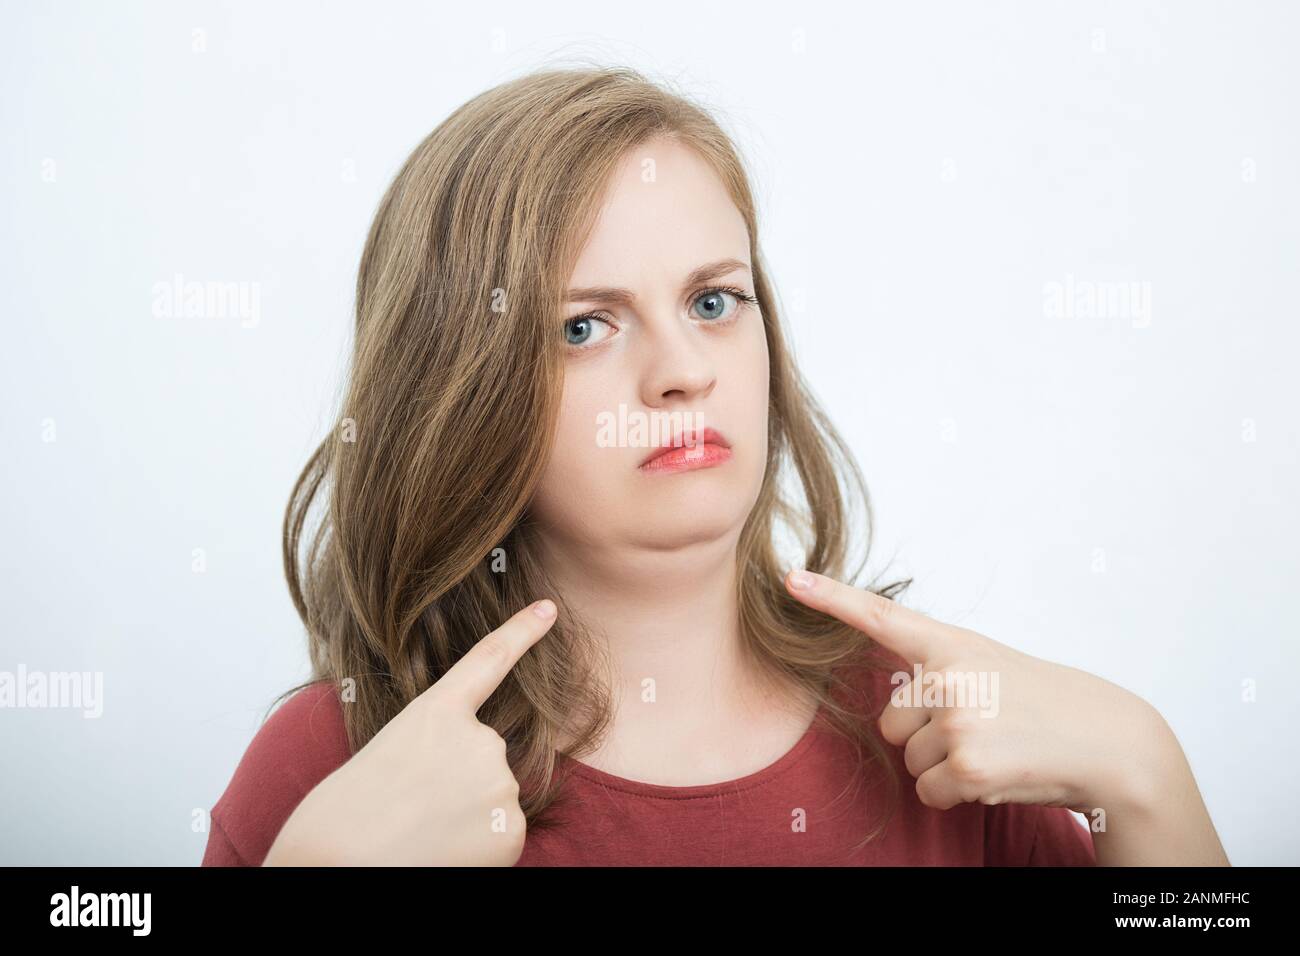 Young caucasian woman girl with double chin Stock Photo